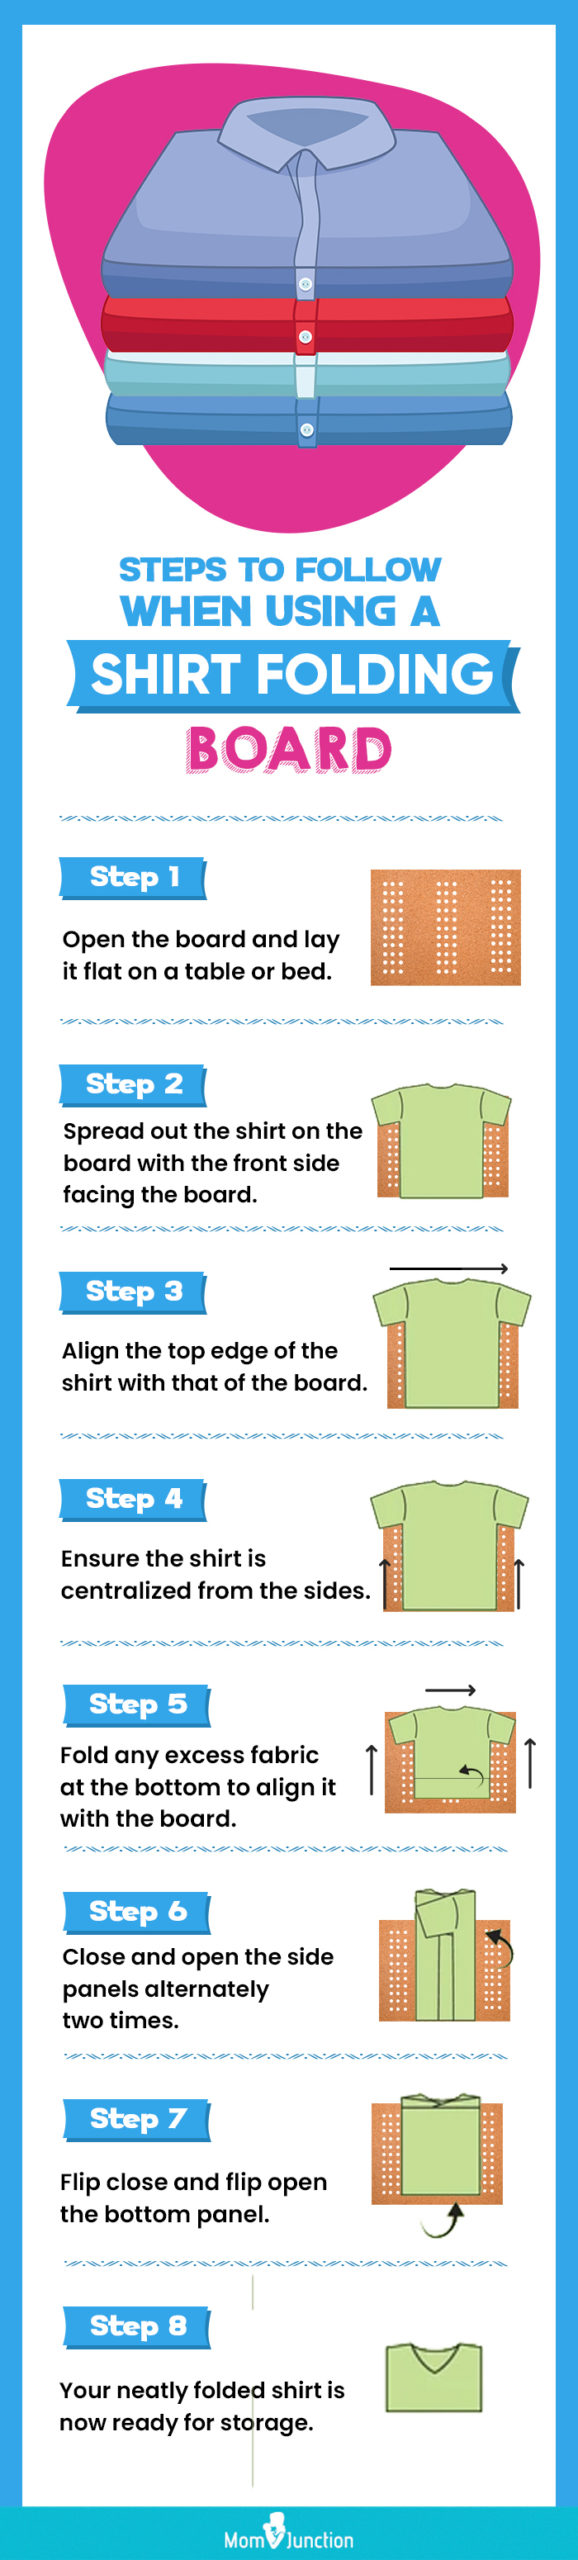 Steps To Follow When Using A Shirt Folding Board (infographic)